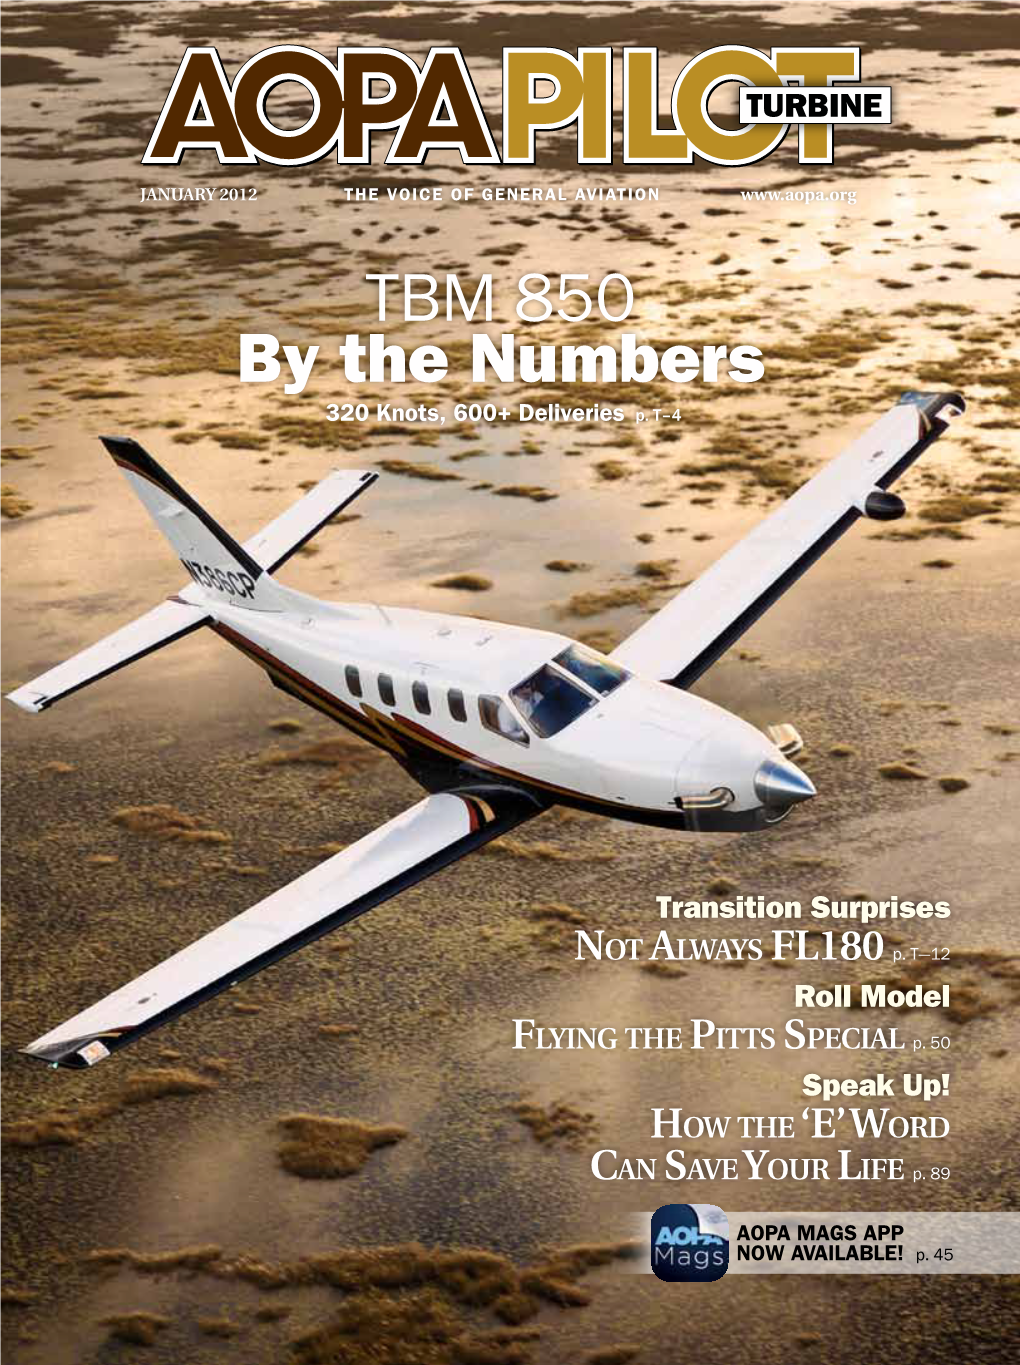 TBM 850 by the Numbers 320 Knots, 600+ Deliveries P